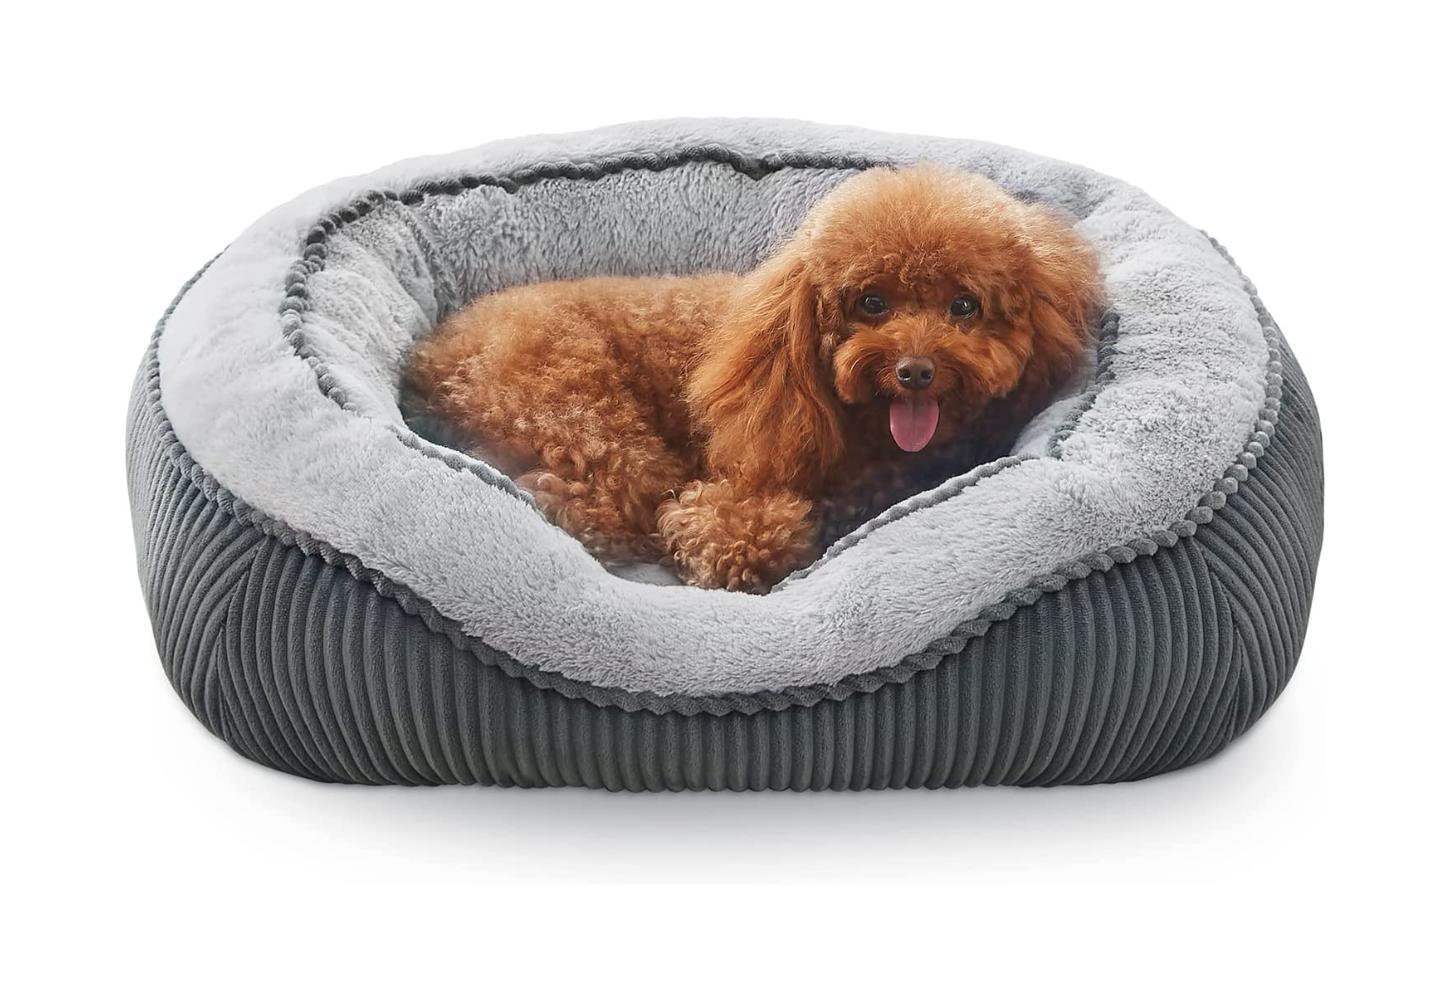 Outdoor Dog Bed, Waterproof, Washable, Large Size, Durable, Water